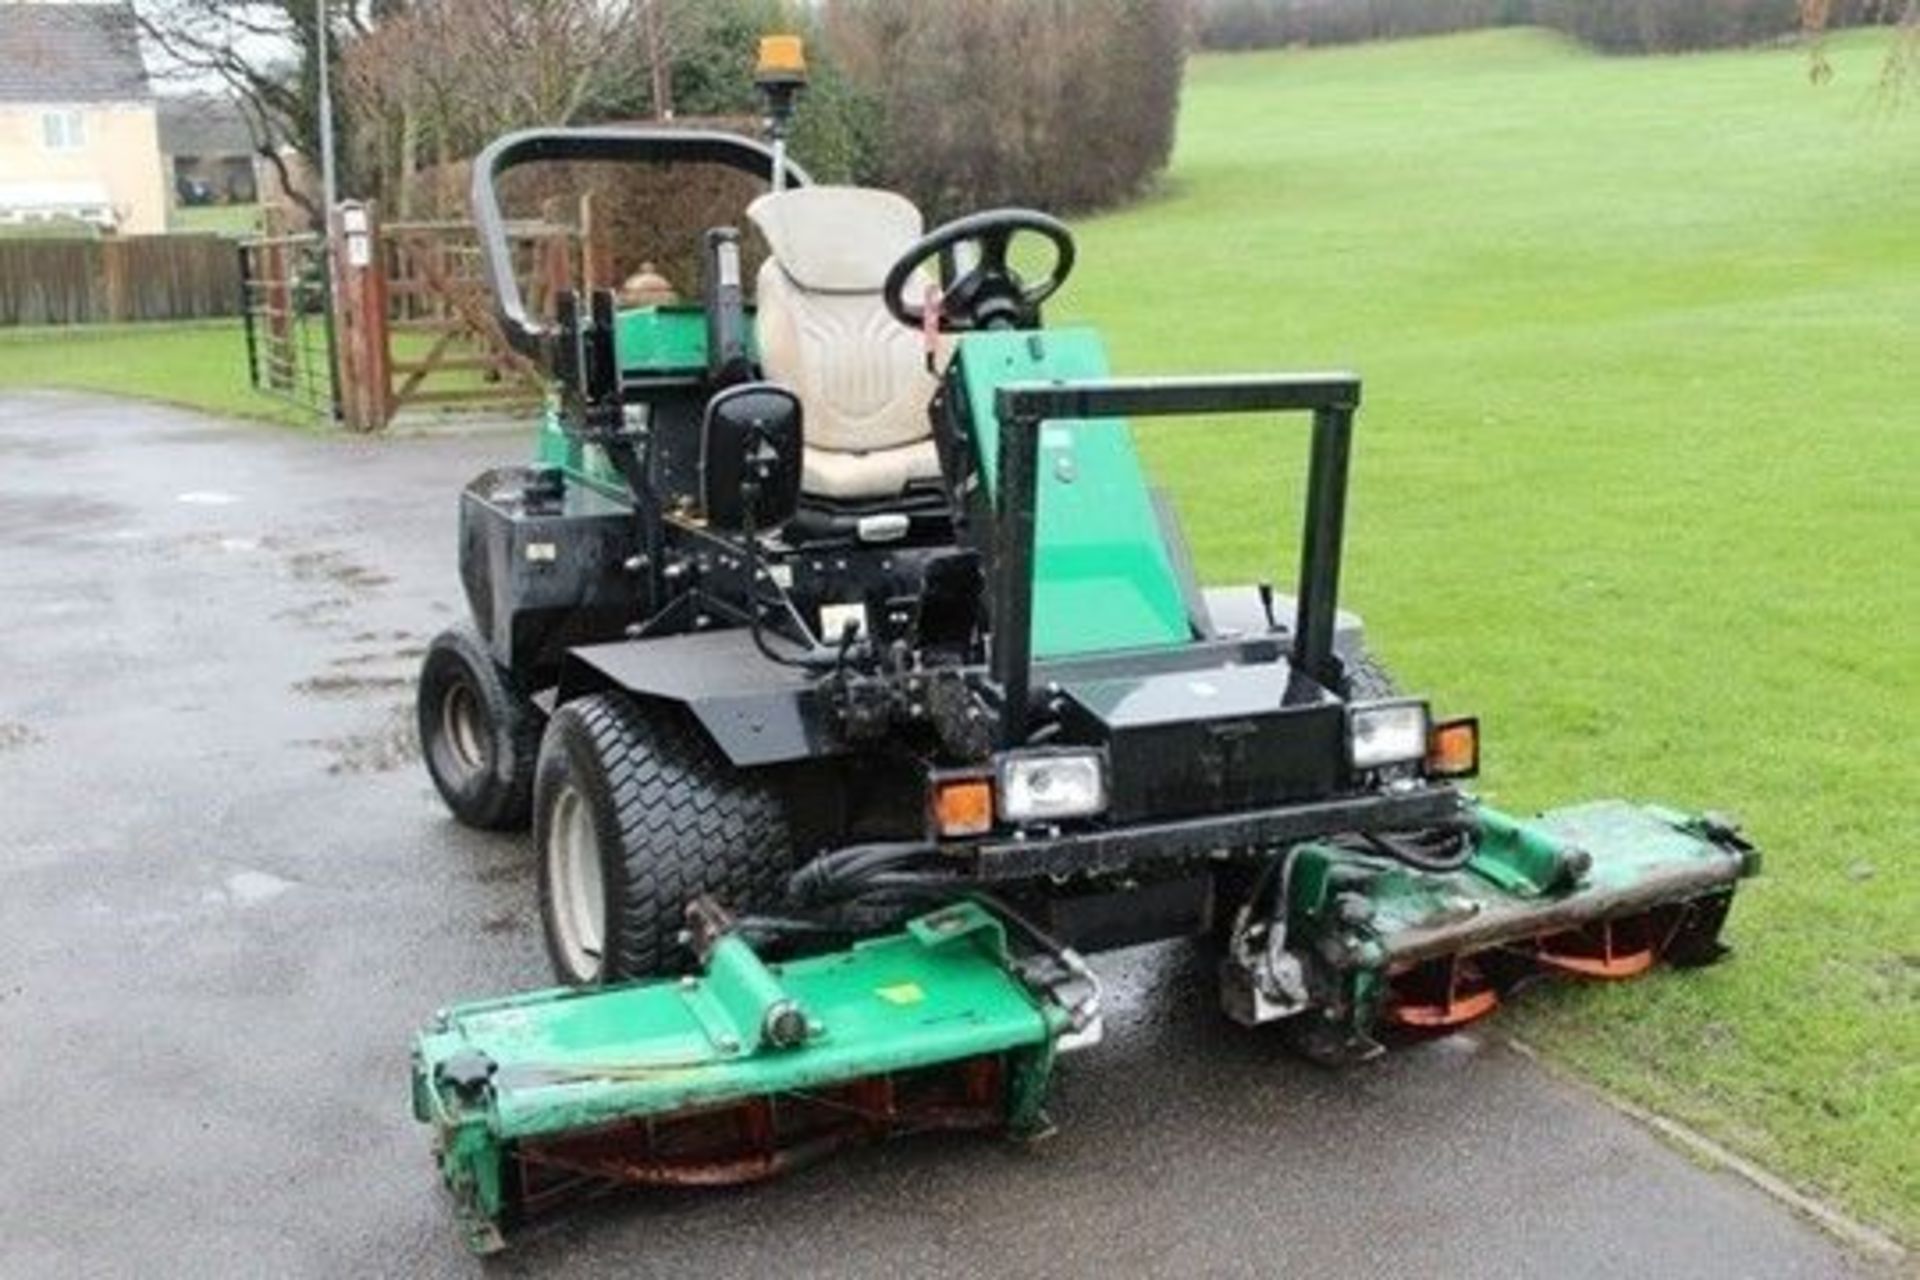 2010 Ransomes Parkway 2250 Plus Ride On Cylinder Mower - Image 4 of 8